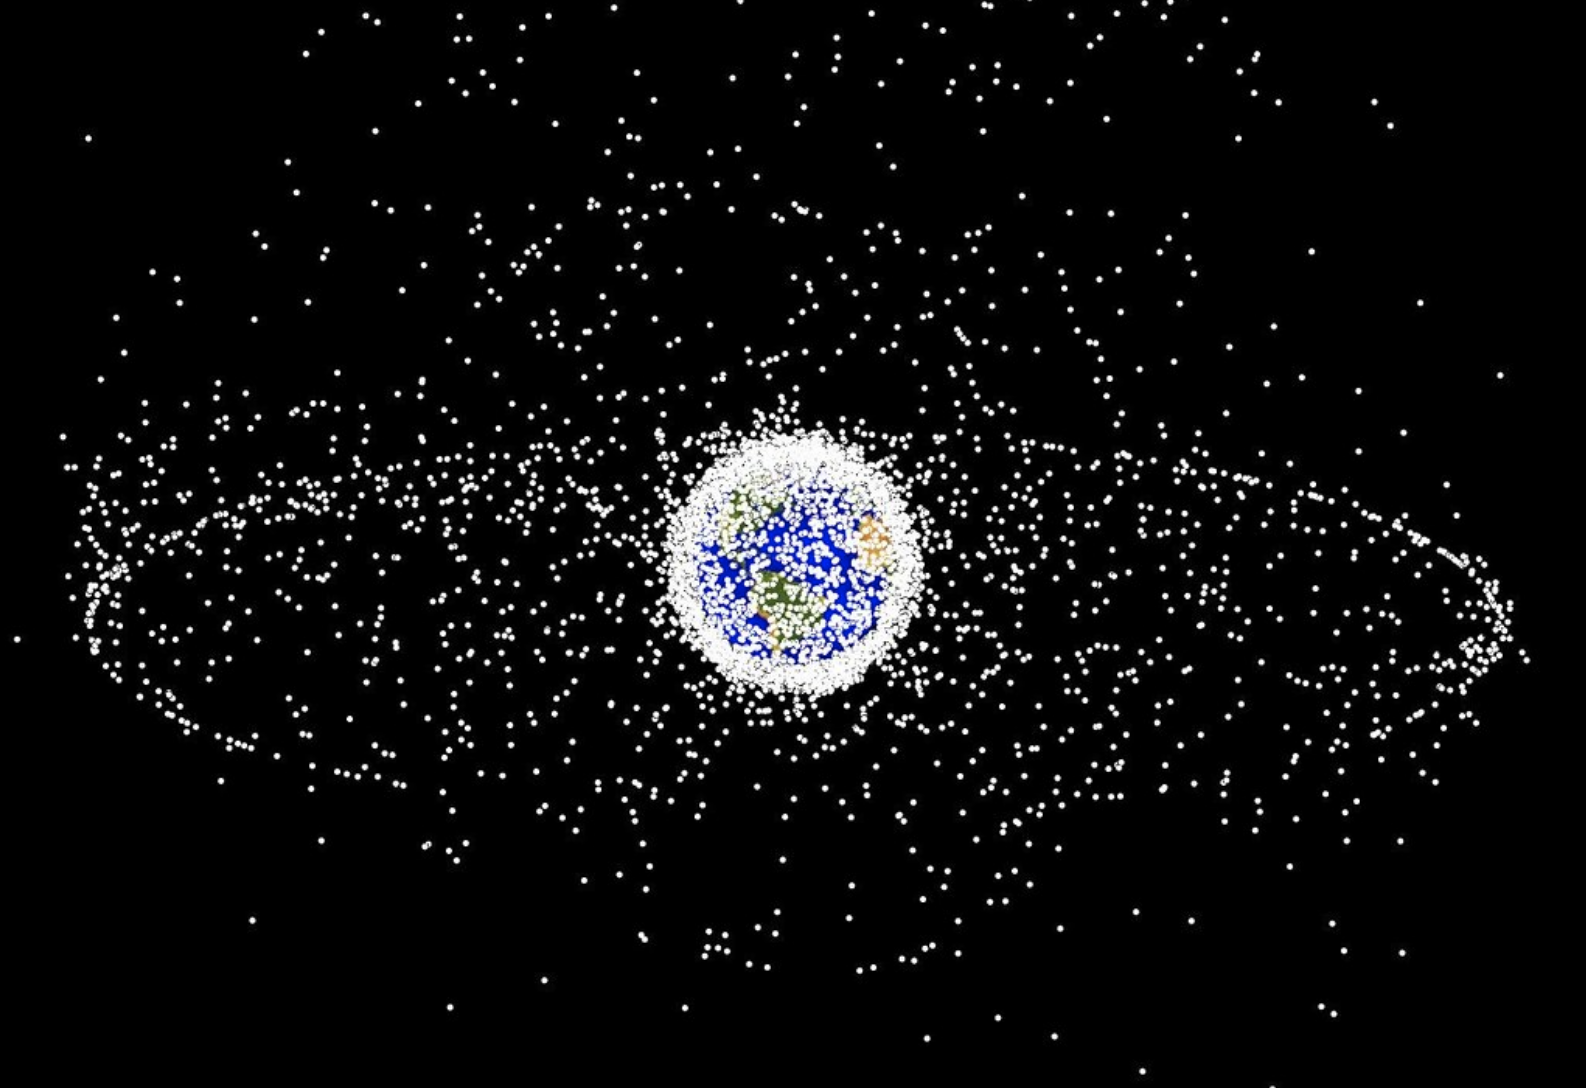 Orbital Debris: why don't we just clean it up? Sept 2022 Perspective